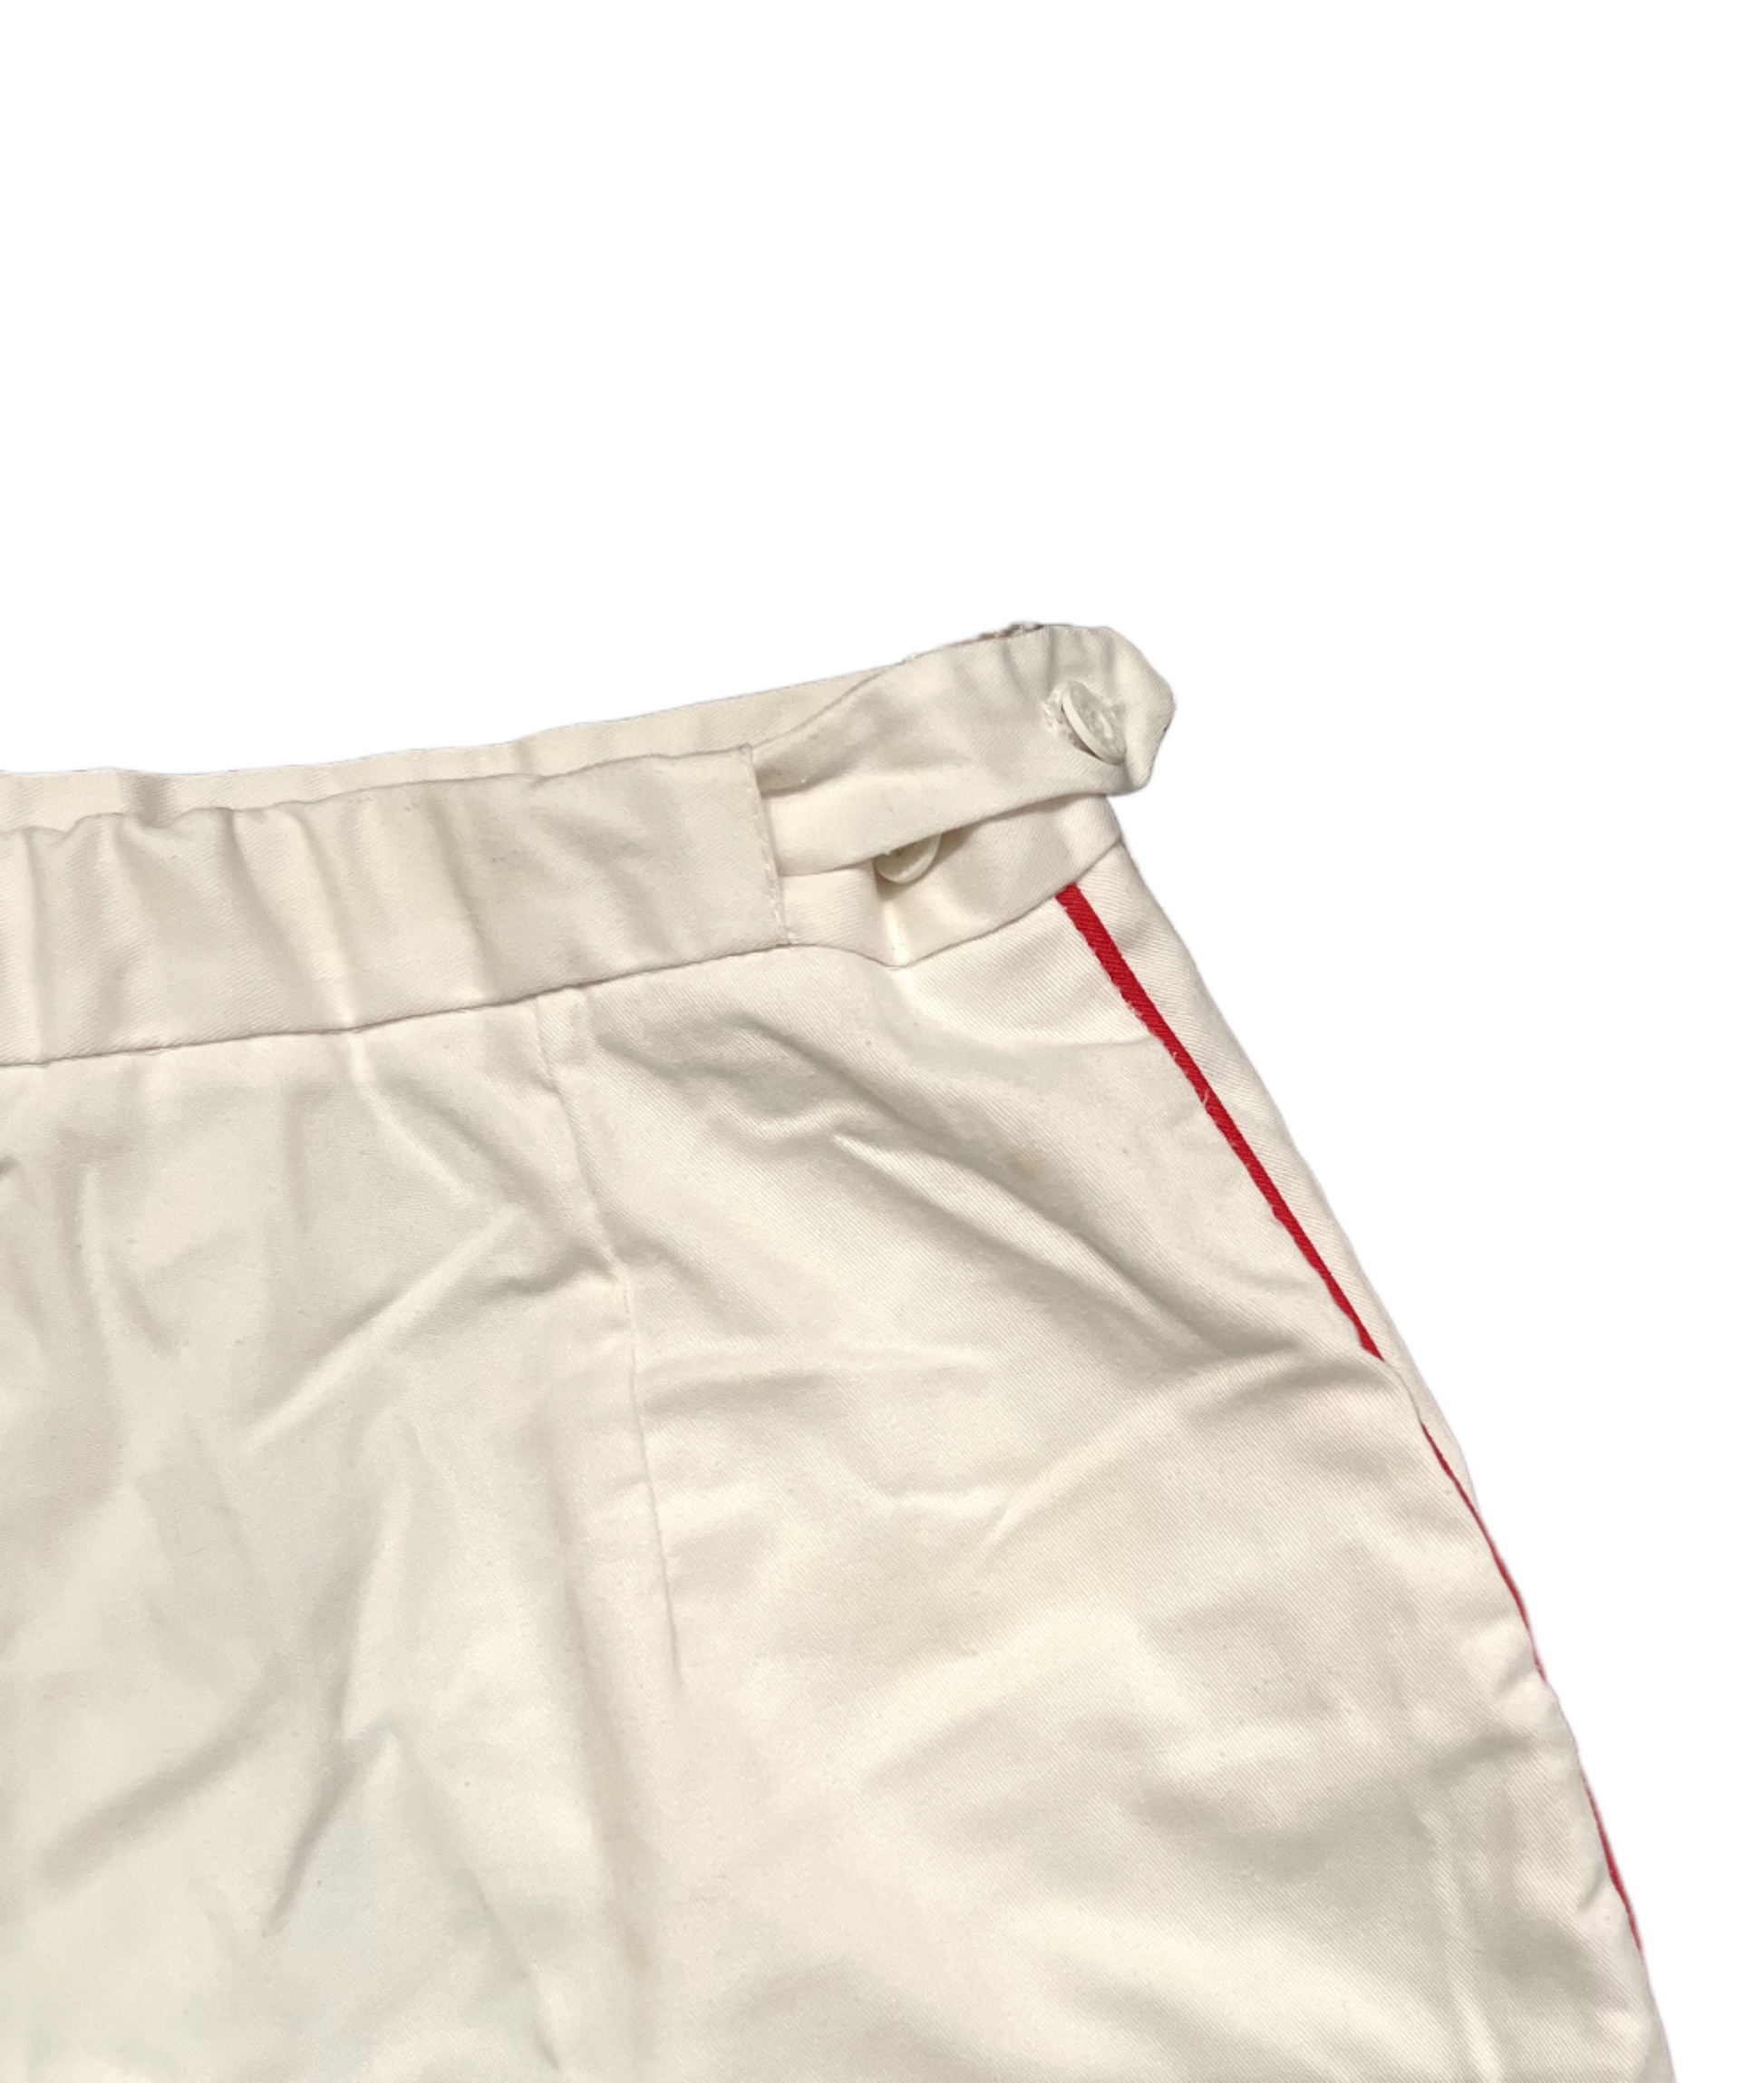 Adjustable waist band of white shorts with red stripe on white background.